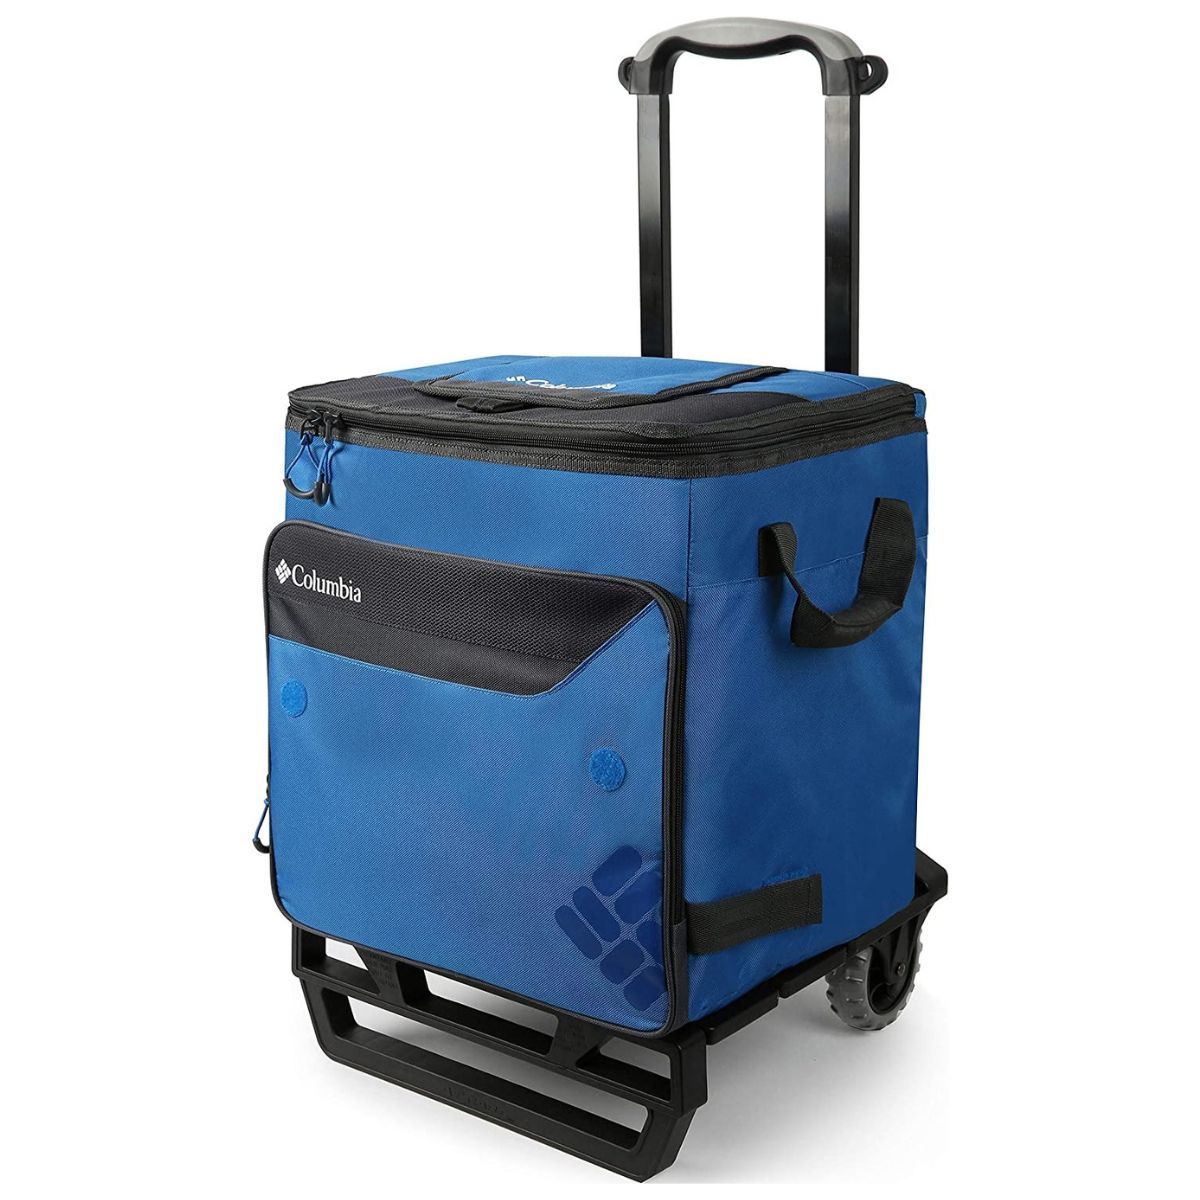 Source 2021 Best New Design Outdoors Thermal Insulated Trolley Cooler Bag  with Swivel Wheels on m.alibaba.com